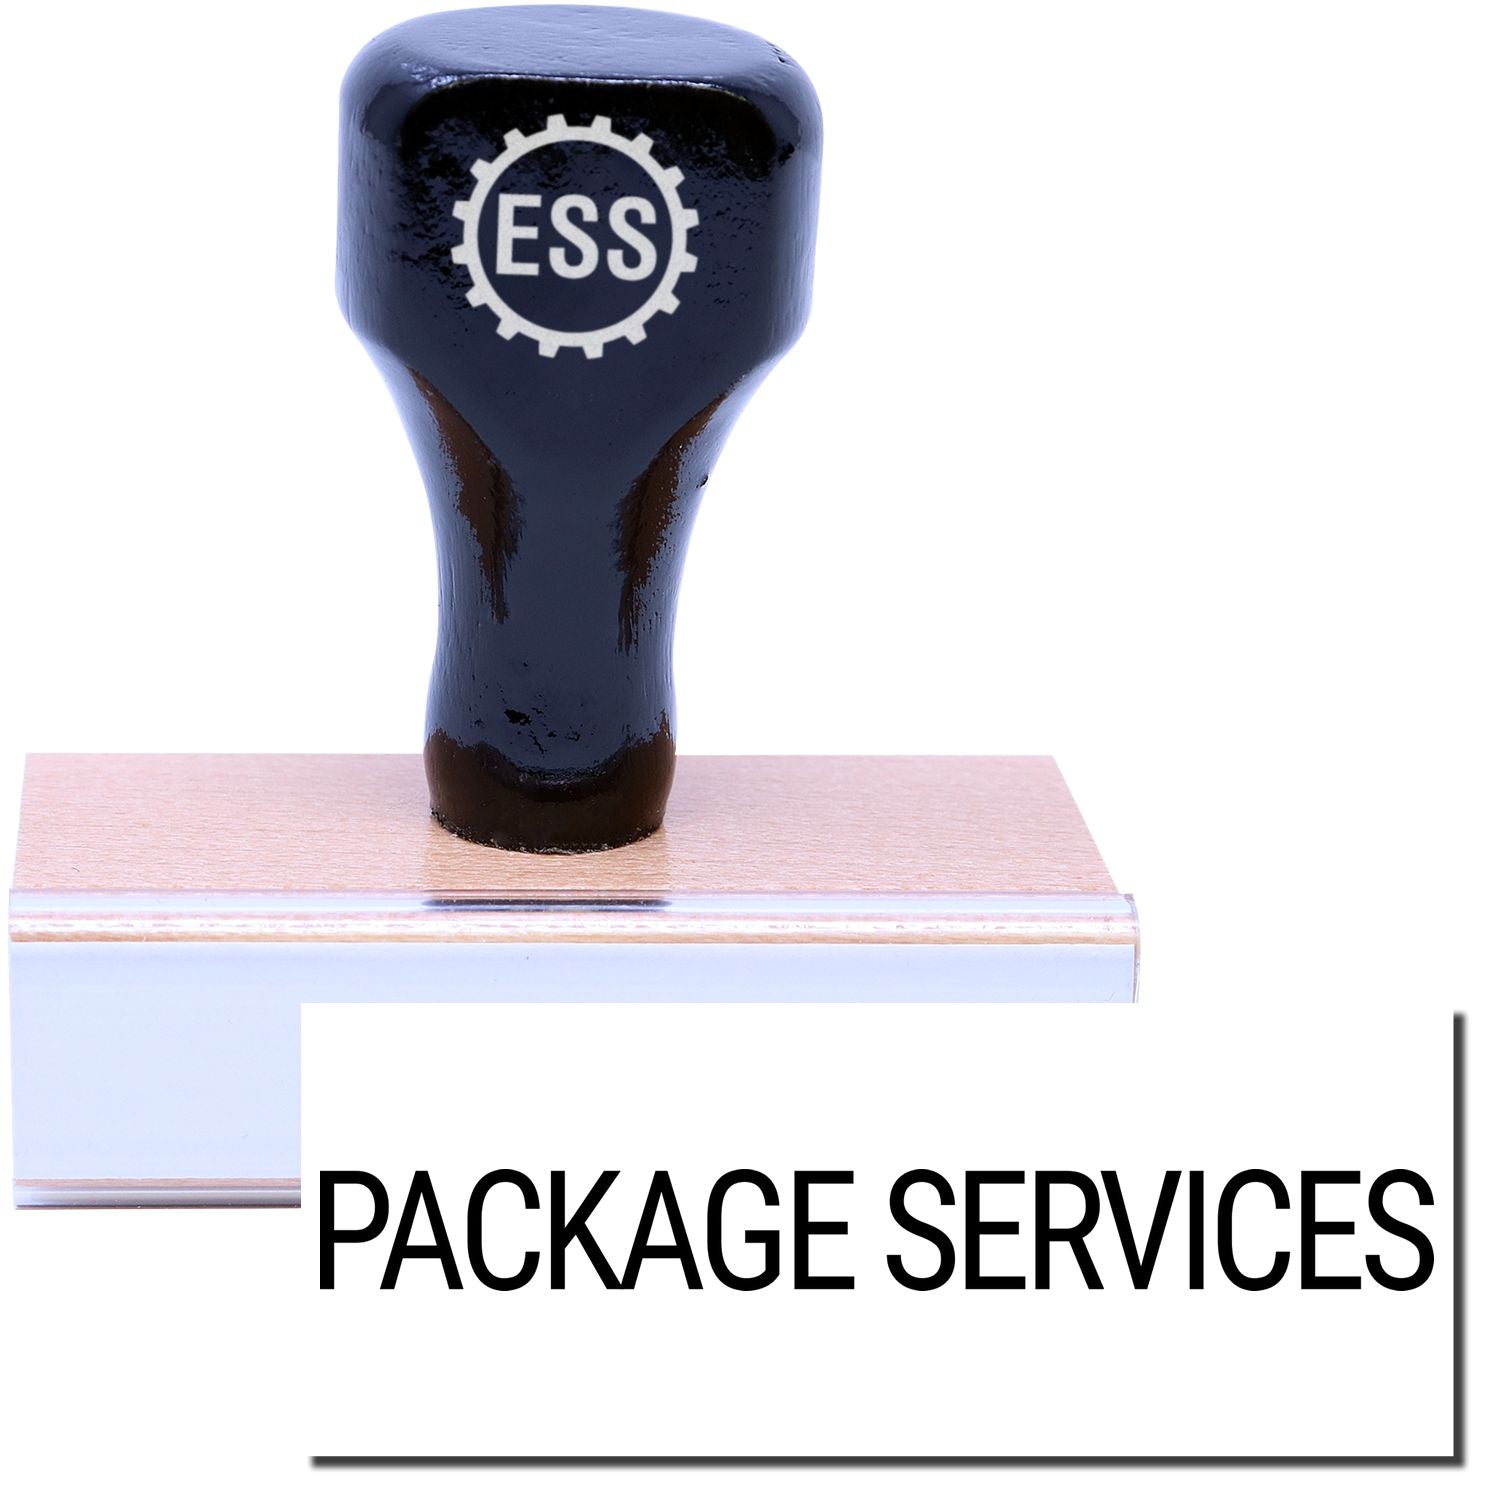 A stock office rubber stamp with a stamped image showing how the text "PACKAGE SERVICES" is displayed after stamping.